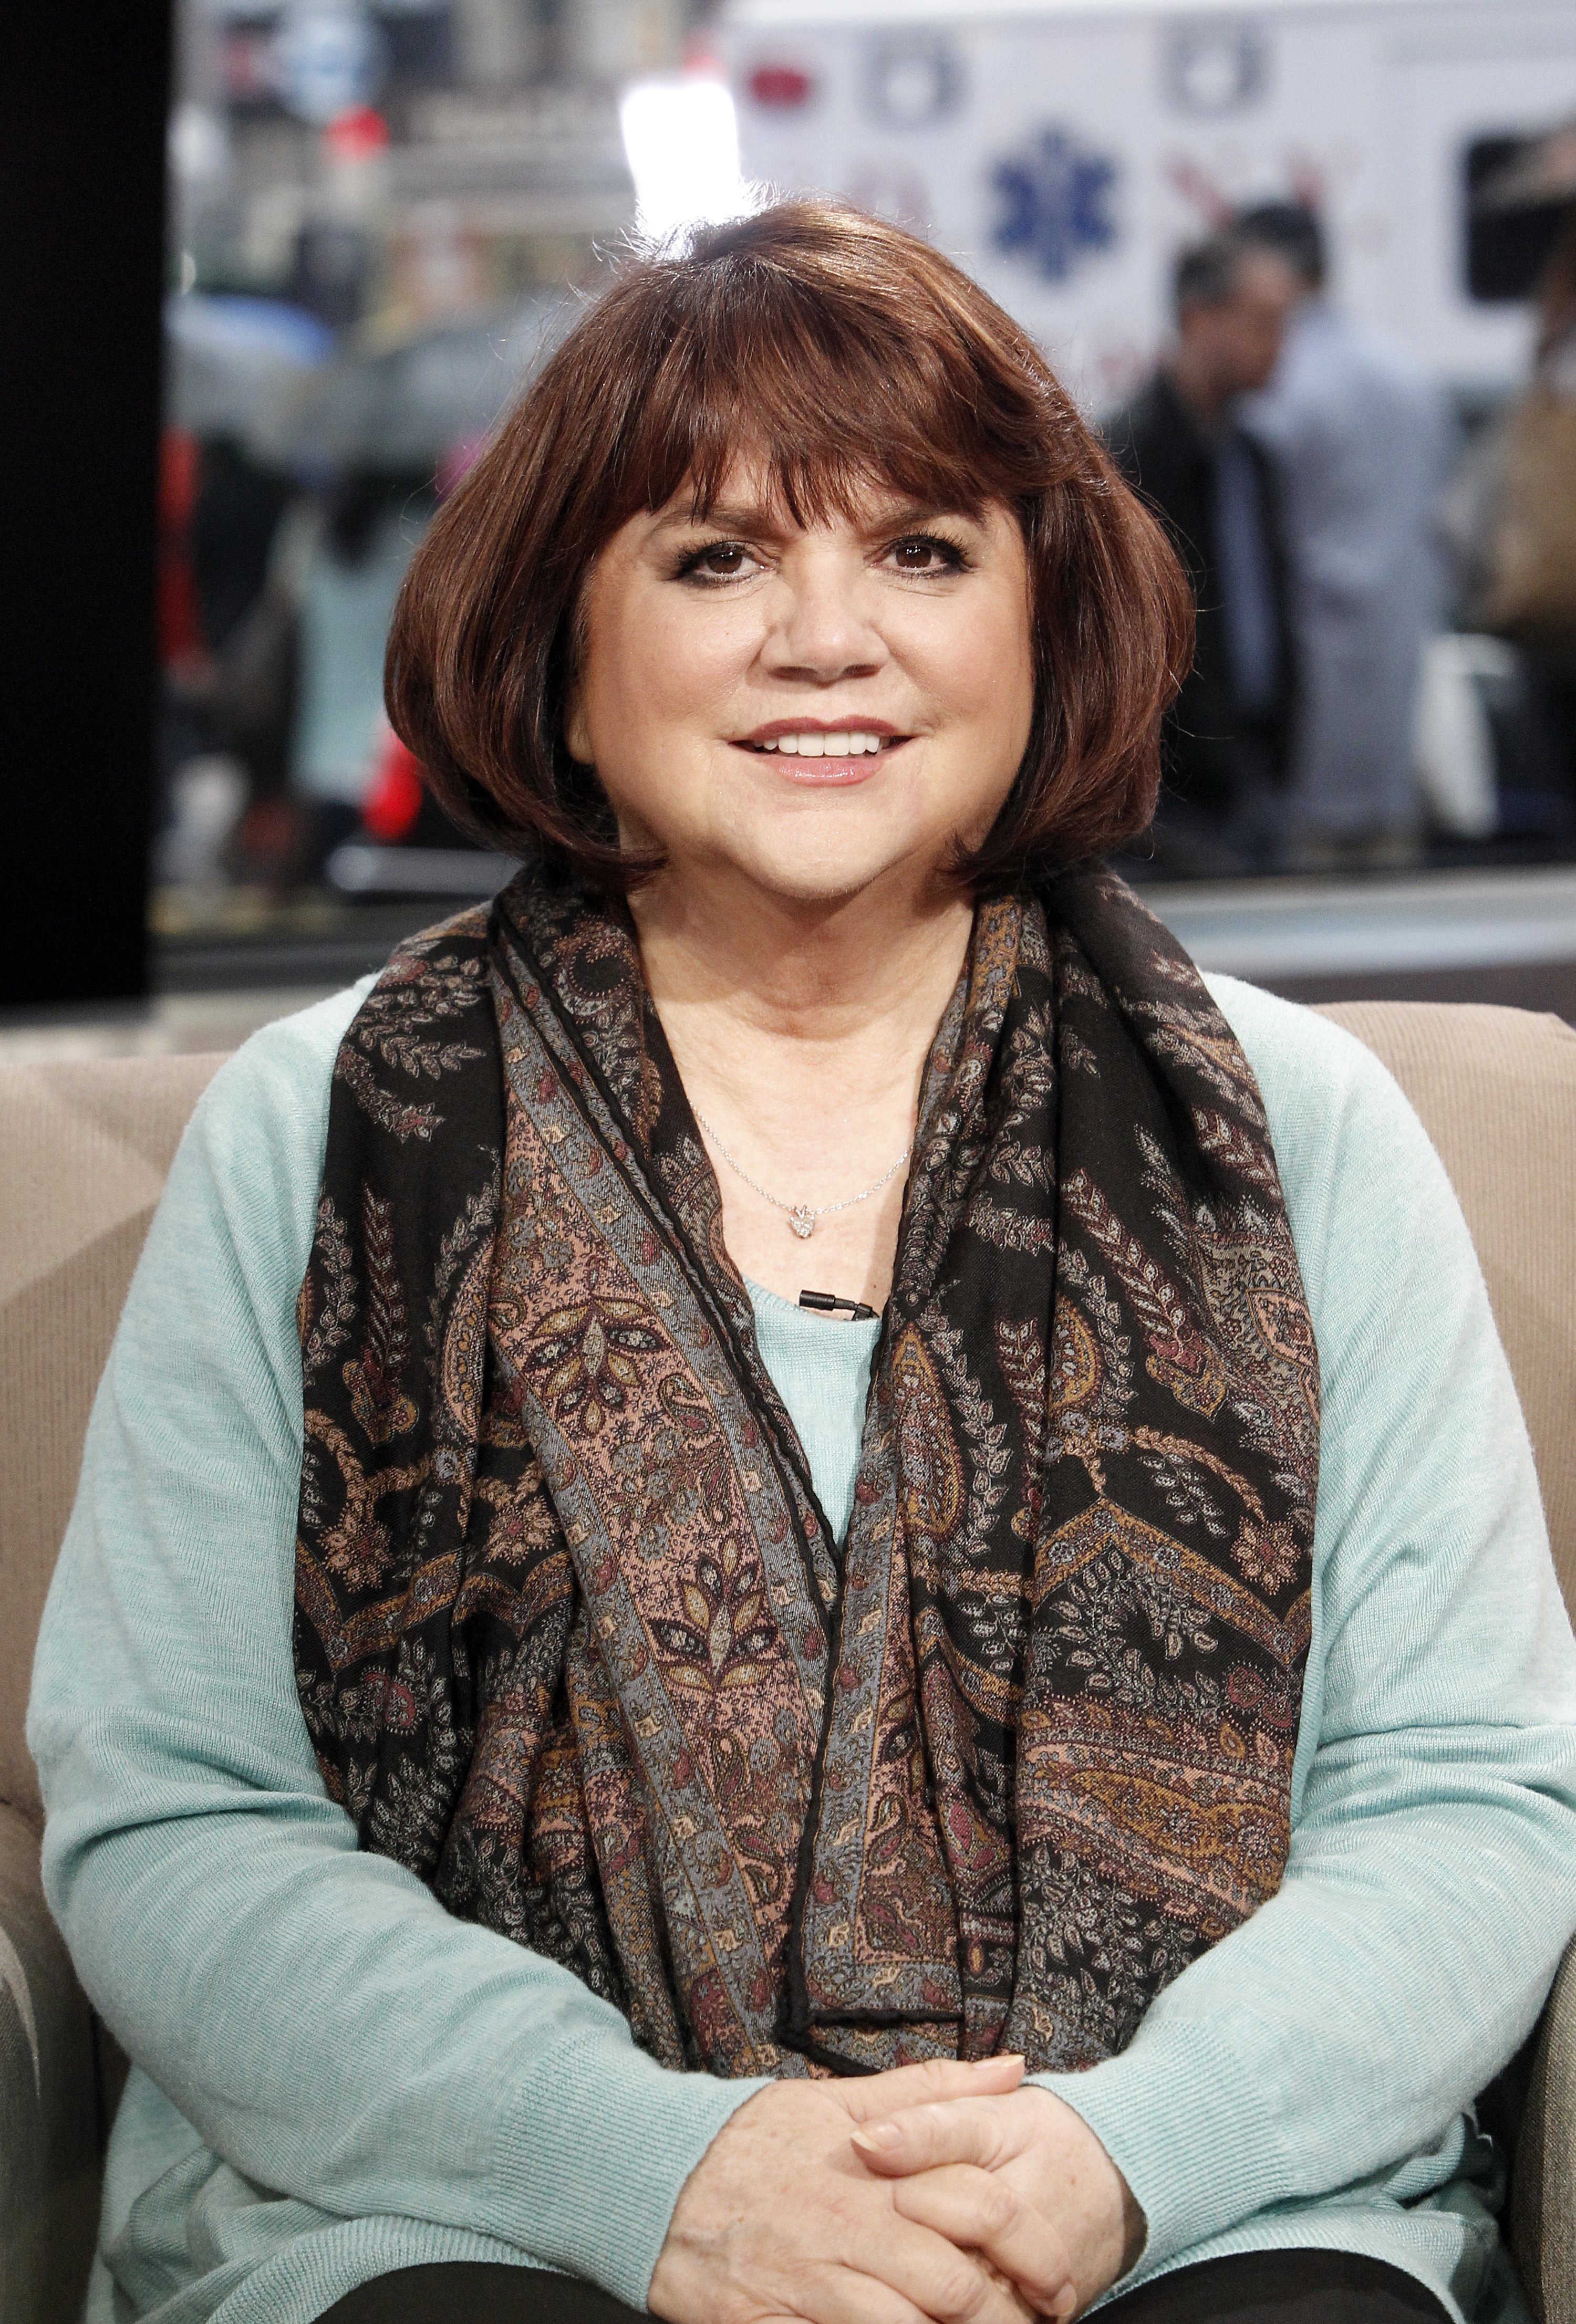 Linda Ronstadt discusses her book "Simple Dreams: A Musical Memoir" on September 16, 2013, on "Good Morning America" | Source: Getty Images